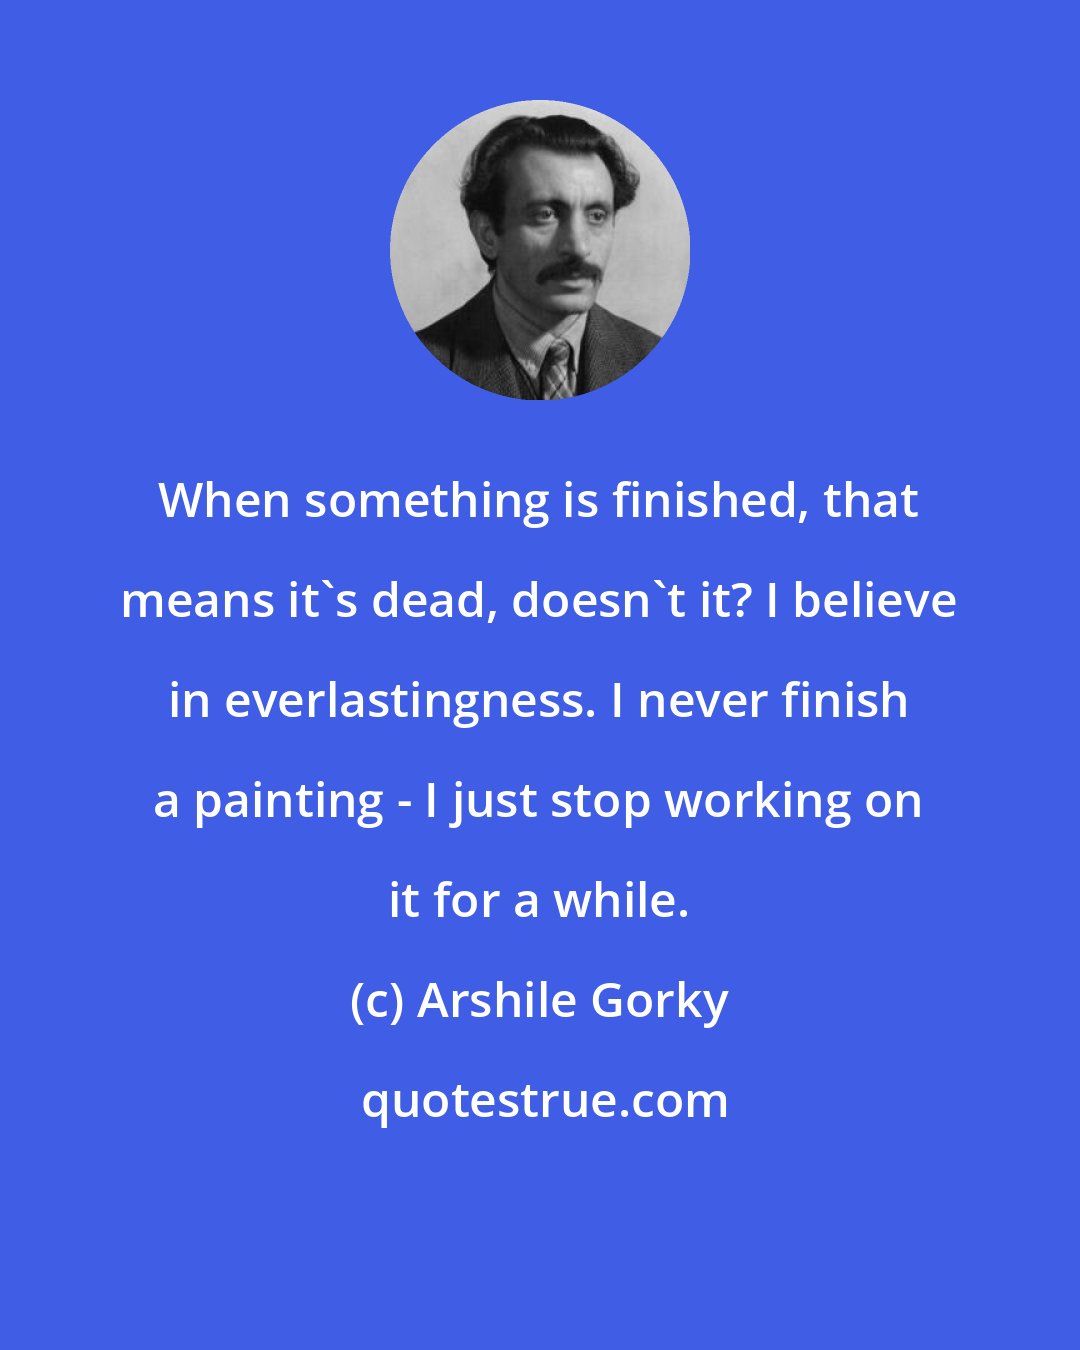 Arshile Gorky: When something is finished, that means it's dead, doesn't it? I believe in everlastingness. I never finish a painting - I just stop working on it for a while.